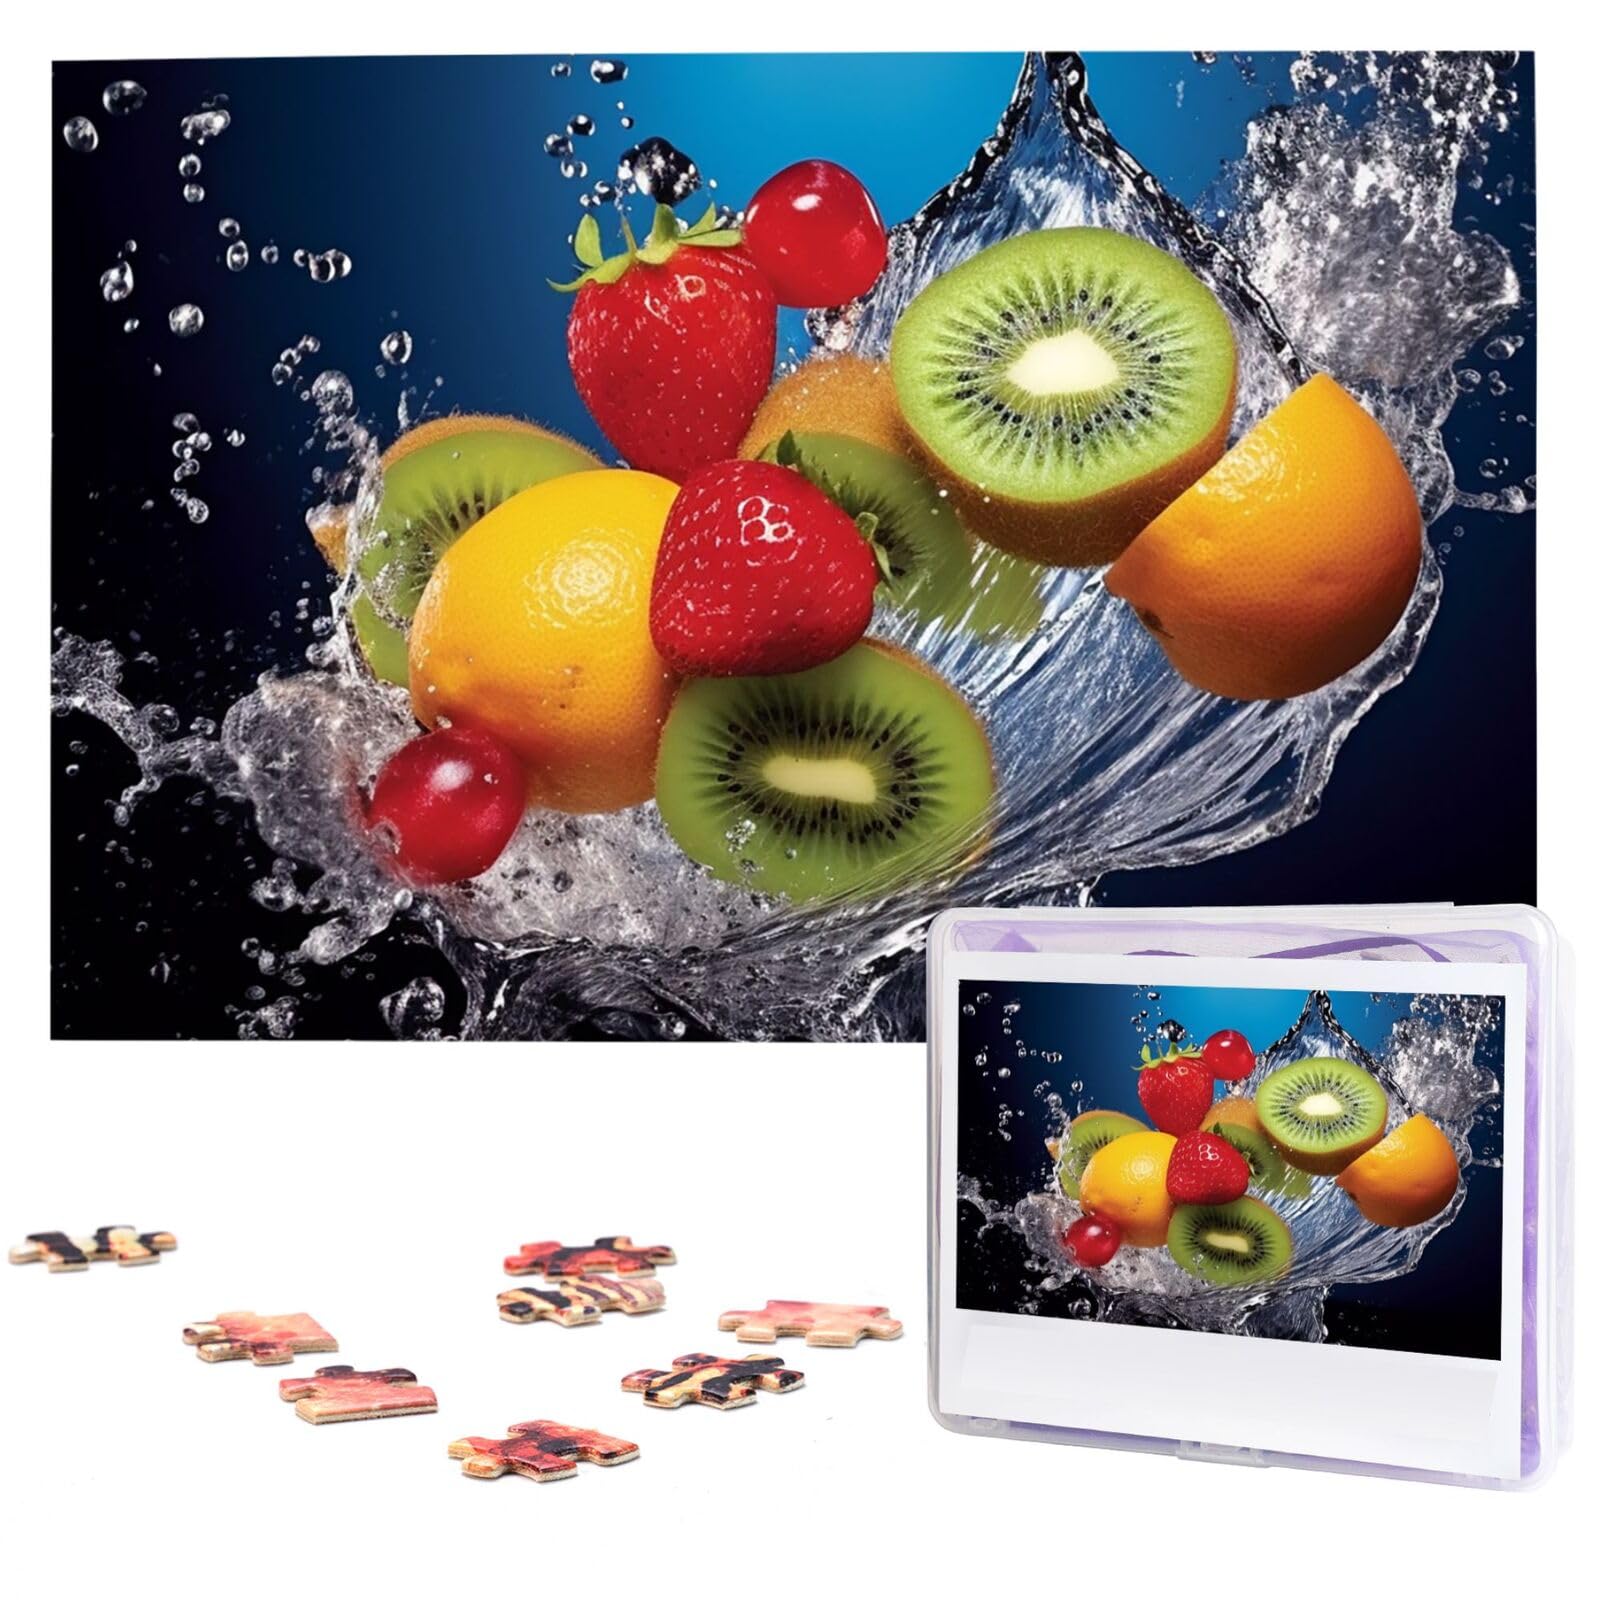 Jigsaw Puzzles 1000 Pieces For Adults Water fruits Jigsaw Puzzle Cool Animal Christmas Puzzle Gift Puzzle For Family Size 75 X 50 cm